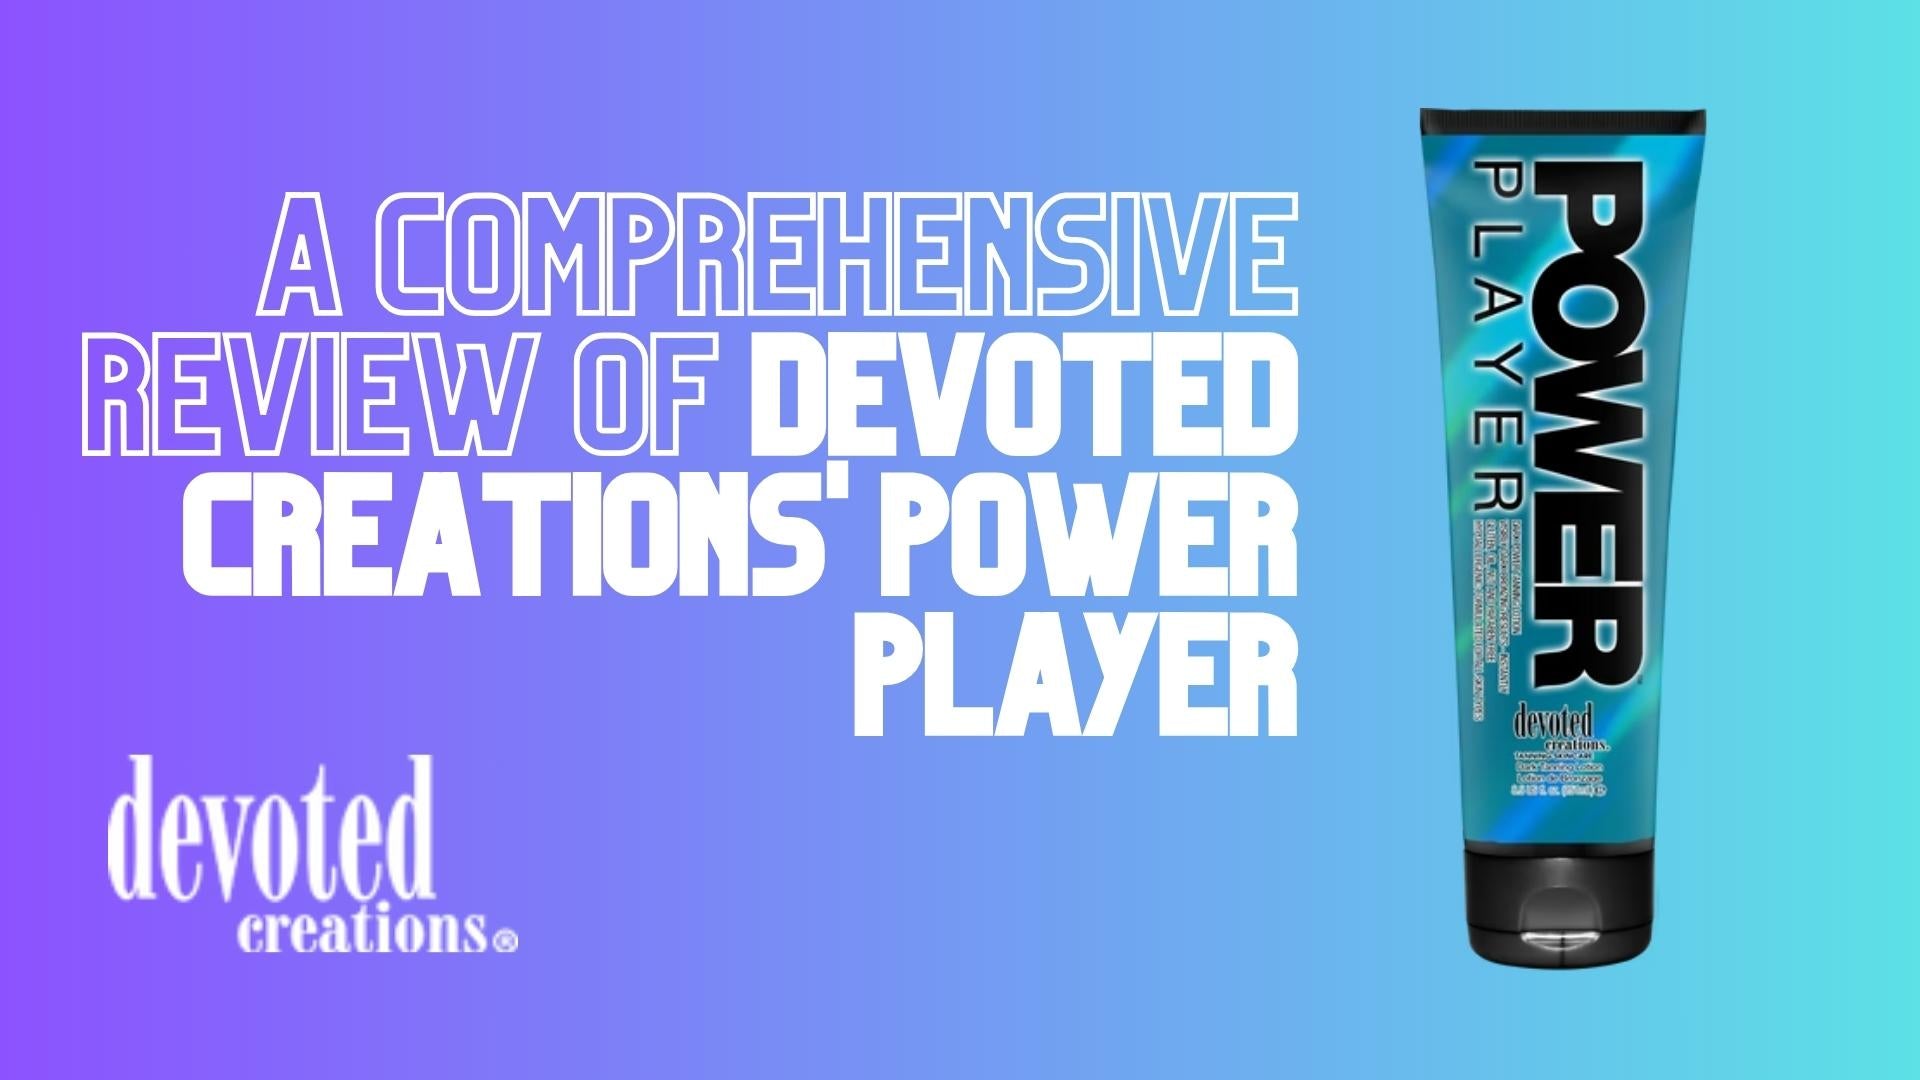 devoted-creations-power-player-comprehensive-review